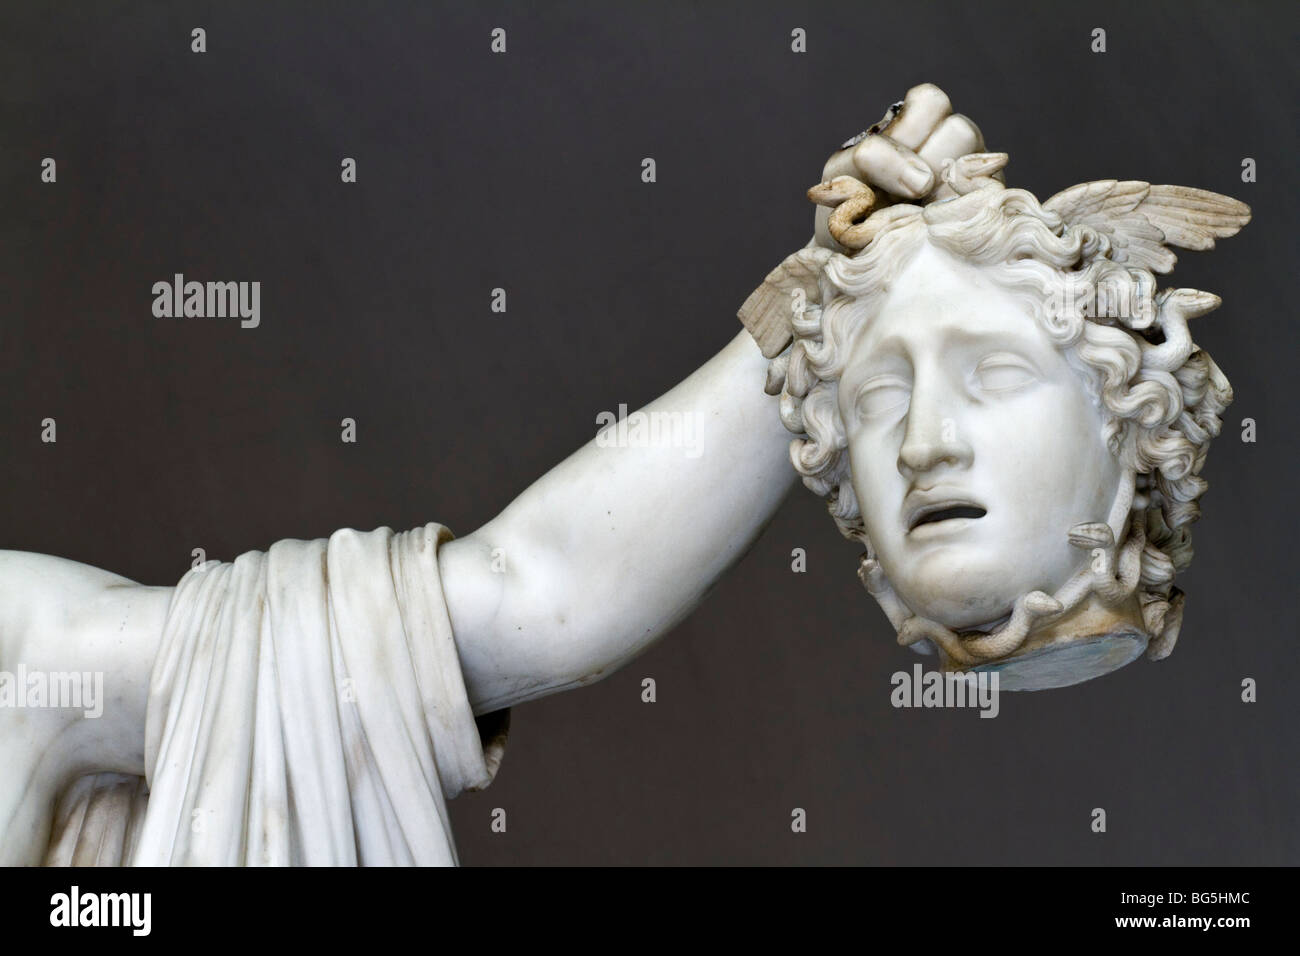 The head of Medusa being held aloft by Perseus. Detail of a statue by Antonio Canova, ca. 1800. Stock Photo